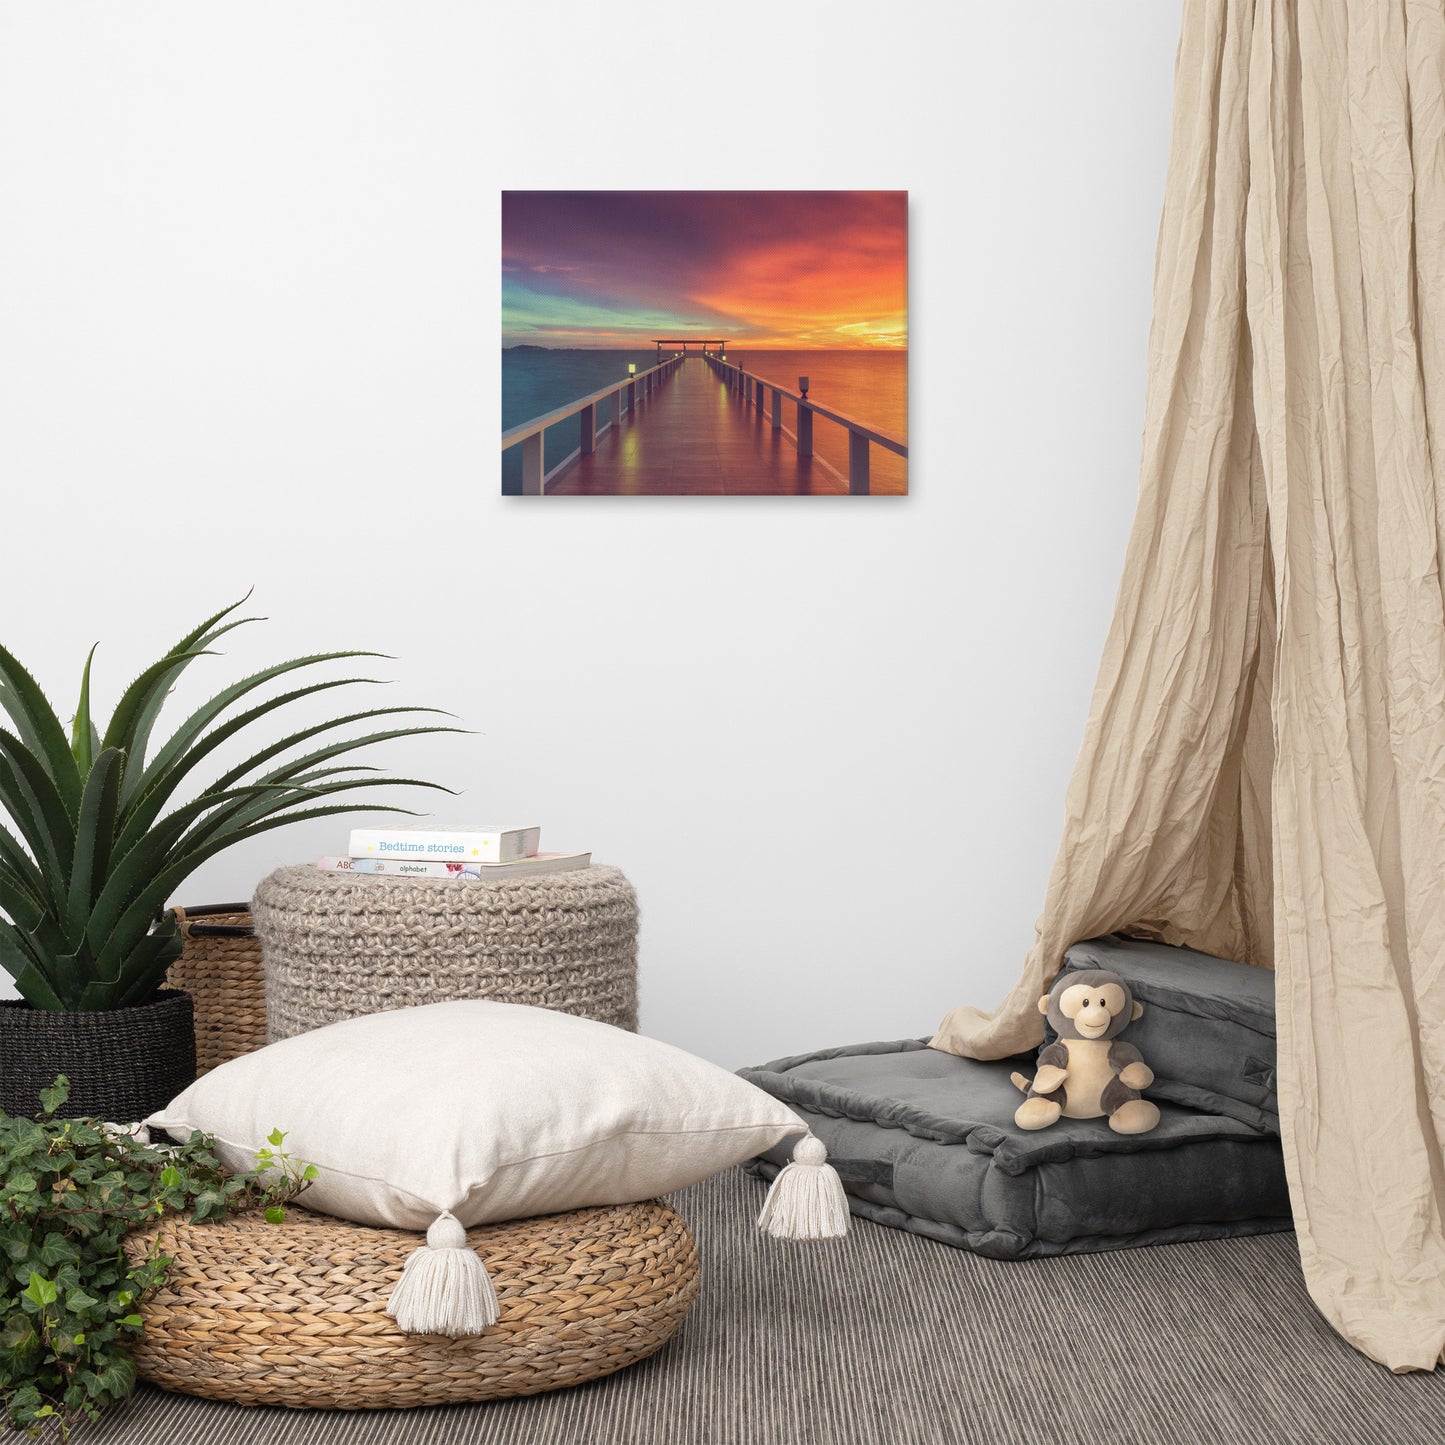 Wall Features Bedroom: Surreal Wooden Pier At Sunset with Intrigued Effect Landscape Photo Canvas Wall Art Prints